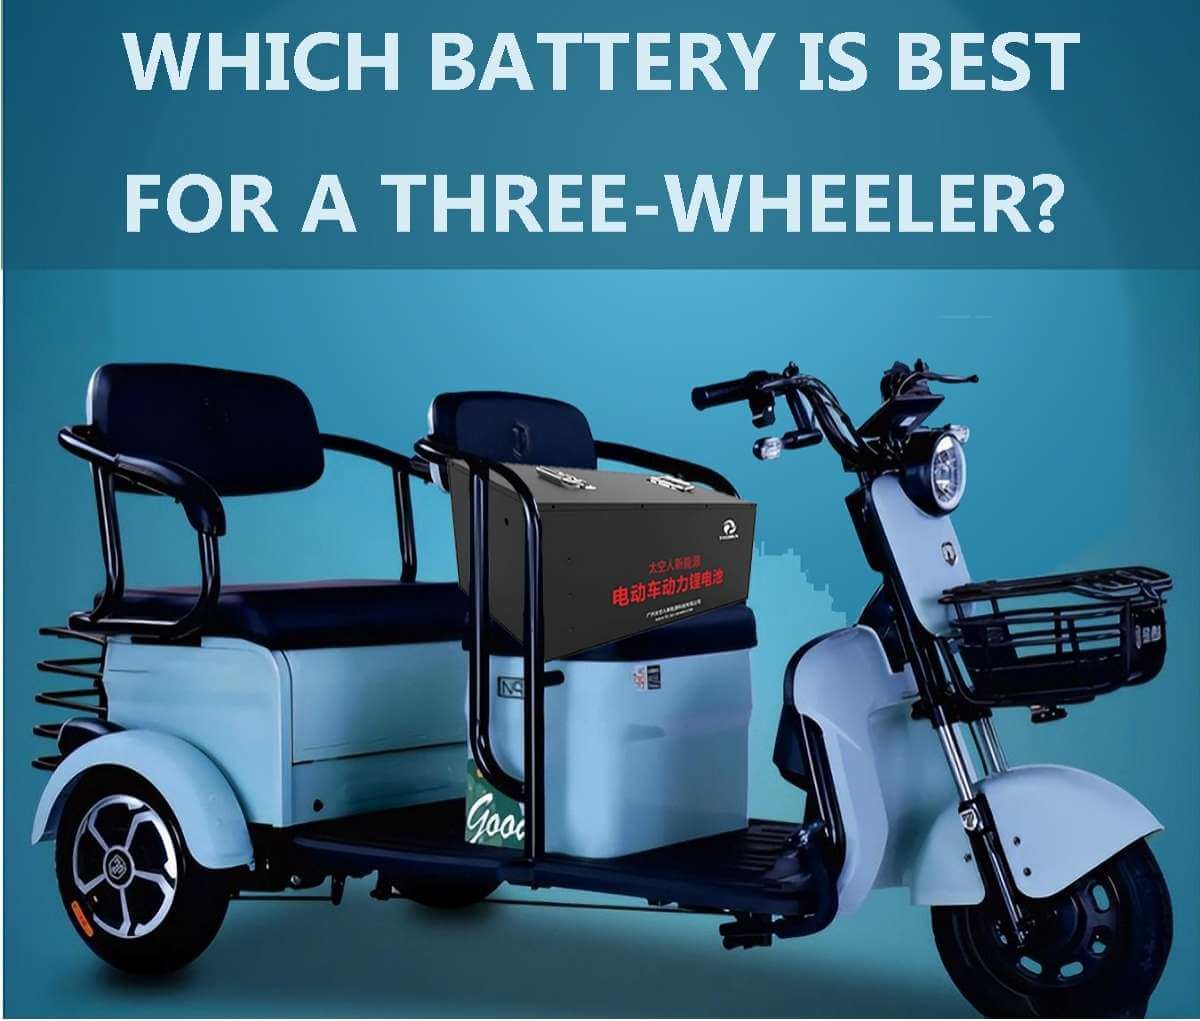 Which battery is best for a three-wheeler